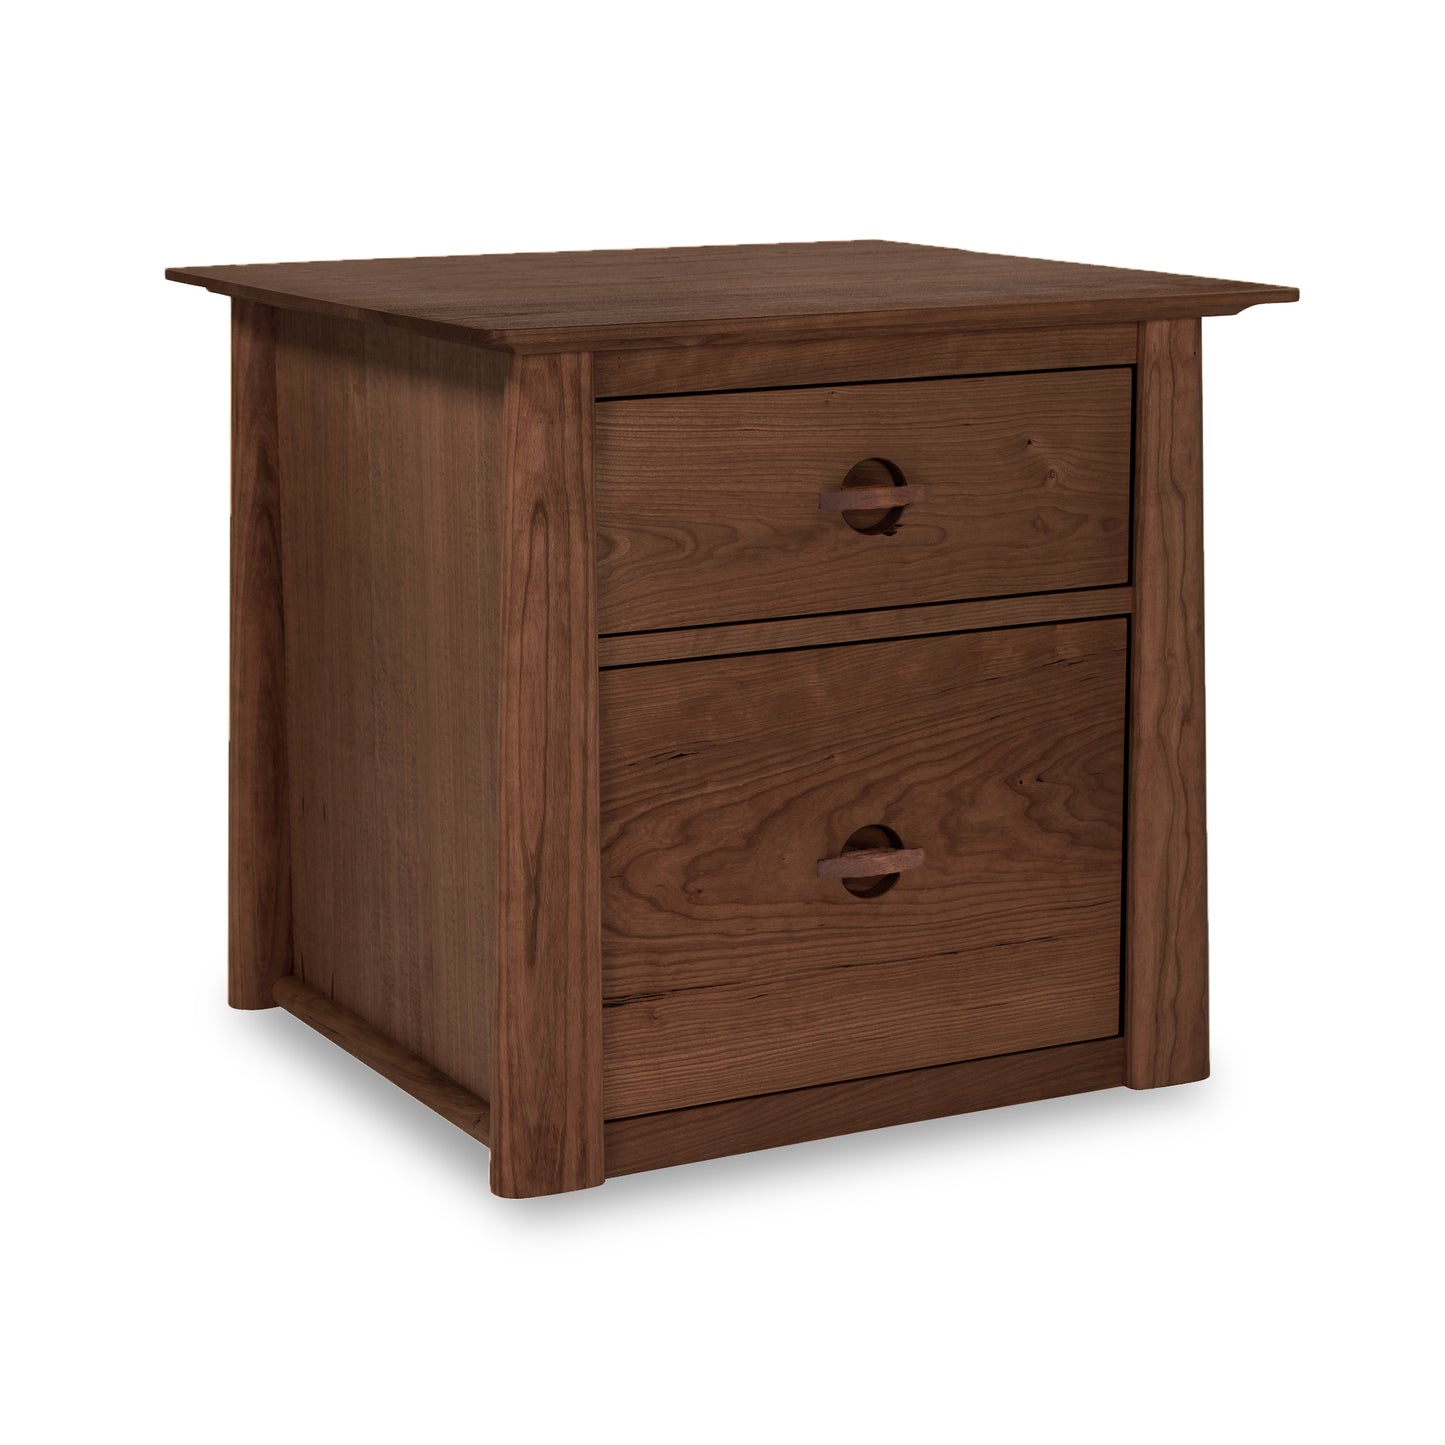 A Cherry Moon File Cabinet two-drawer nightstand isolated on a white background. (Brand: Maple Corner Woodworks)